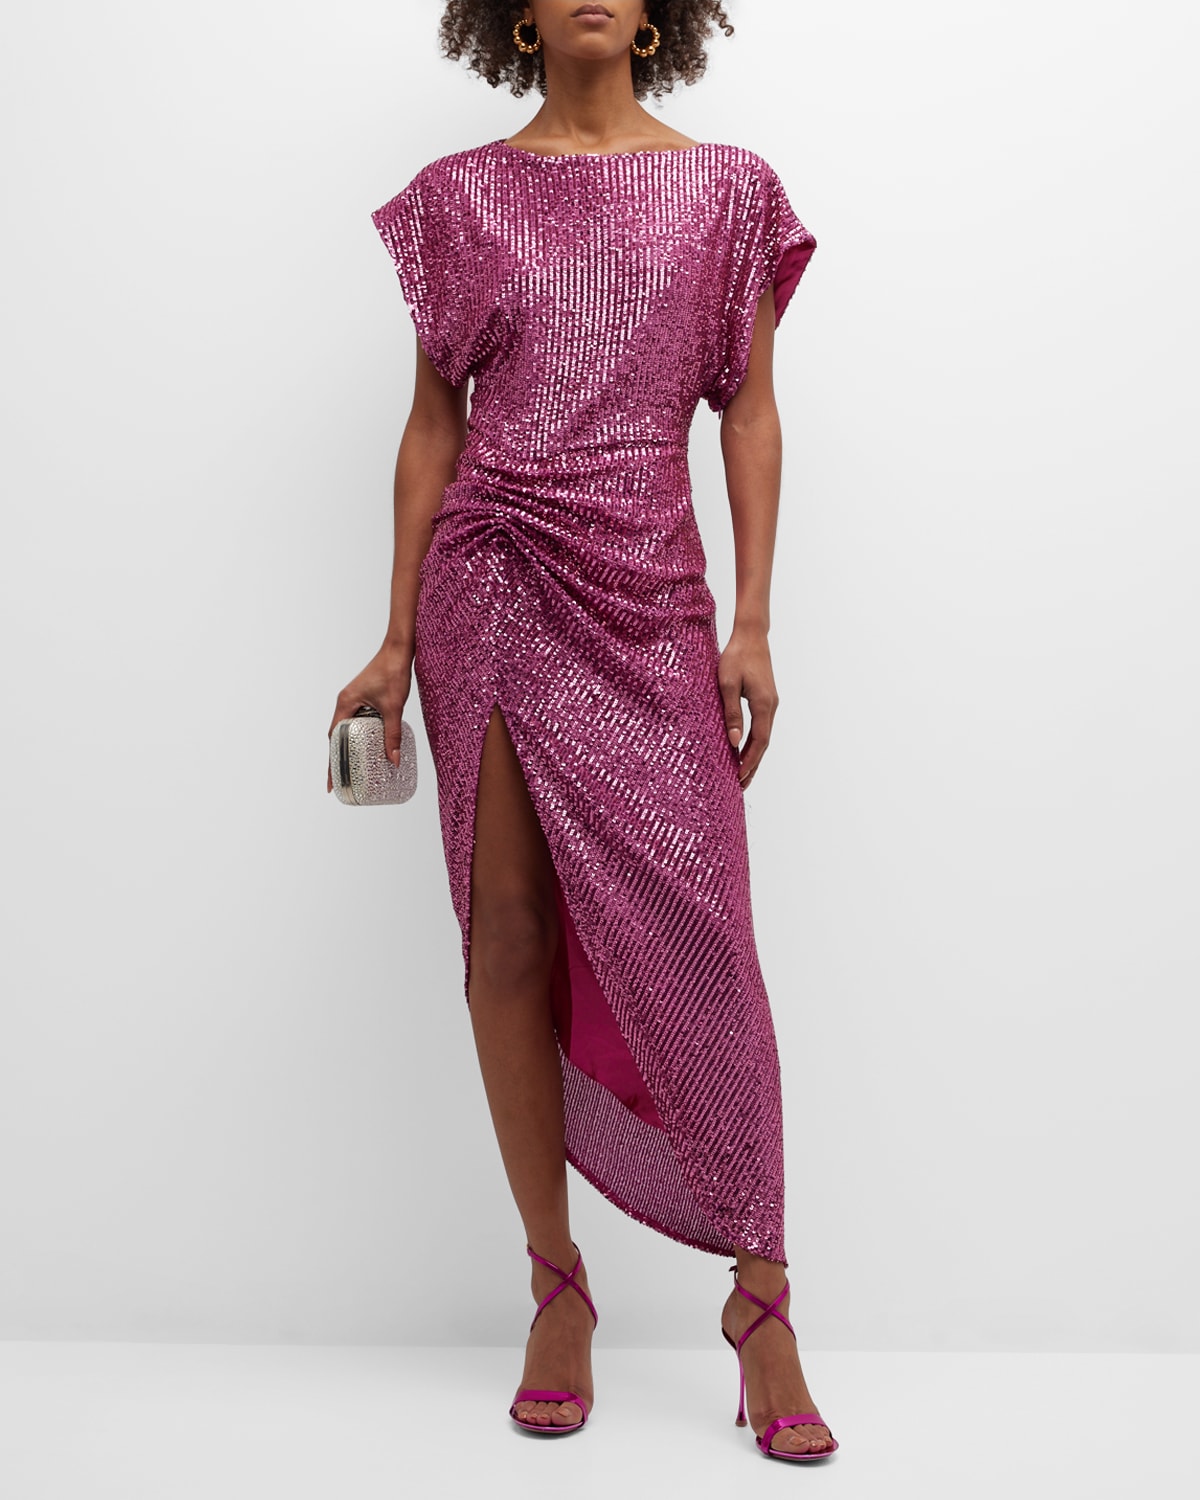 IN THE MOOD FOR LOVE BERCOT SEQUINED COCKTAIL DRESS